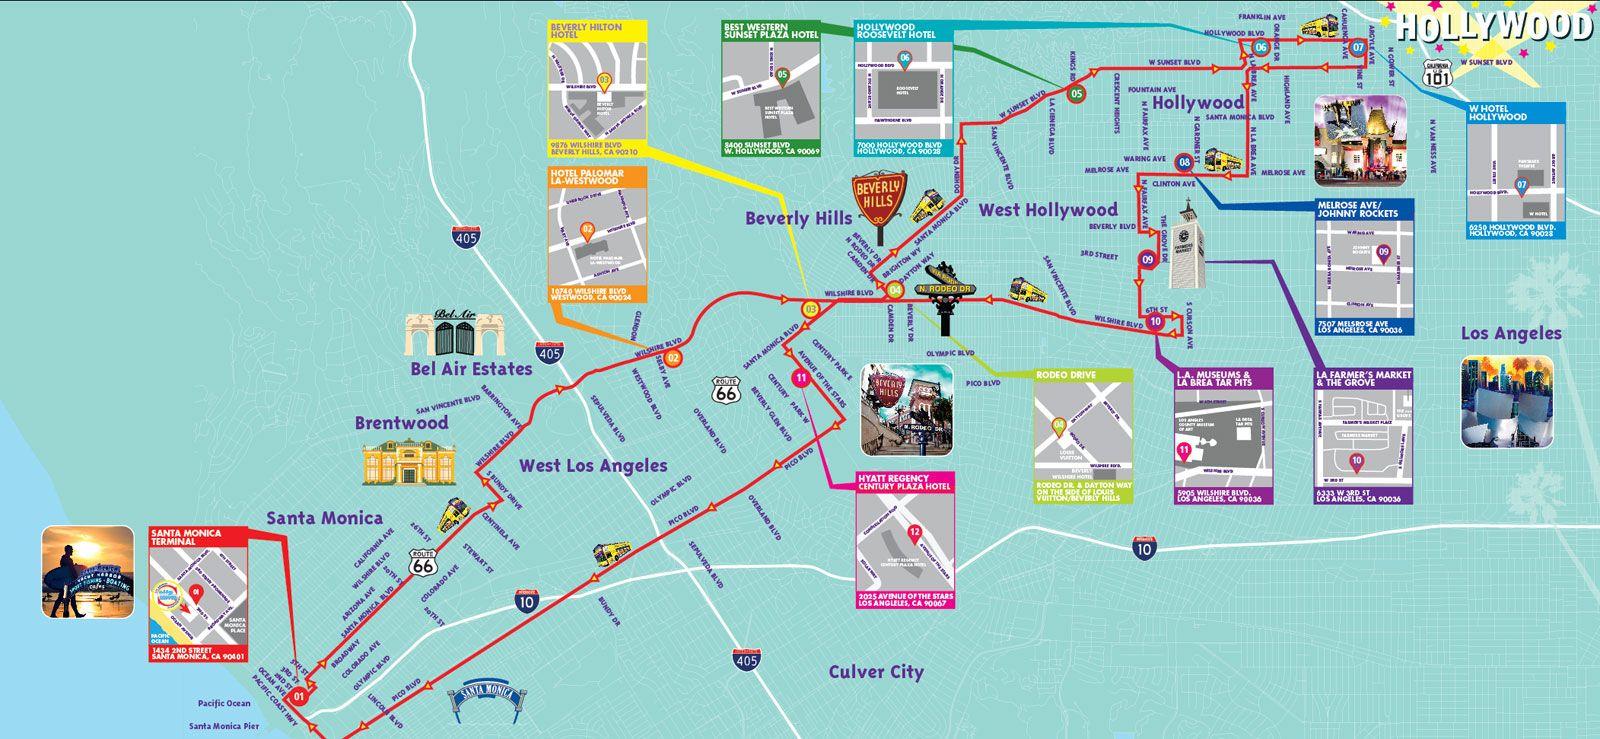 City Sightseeing Los Angeles Map City Sightseeing Map Los